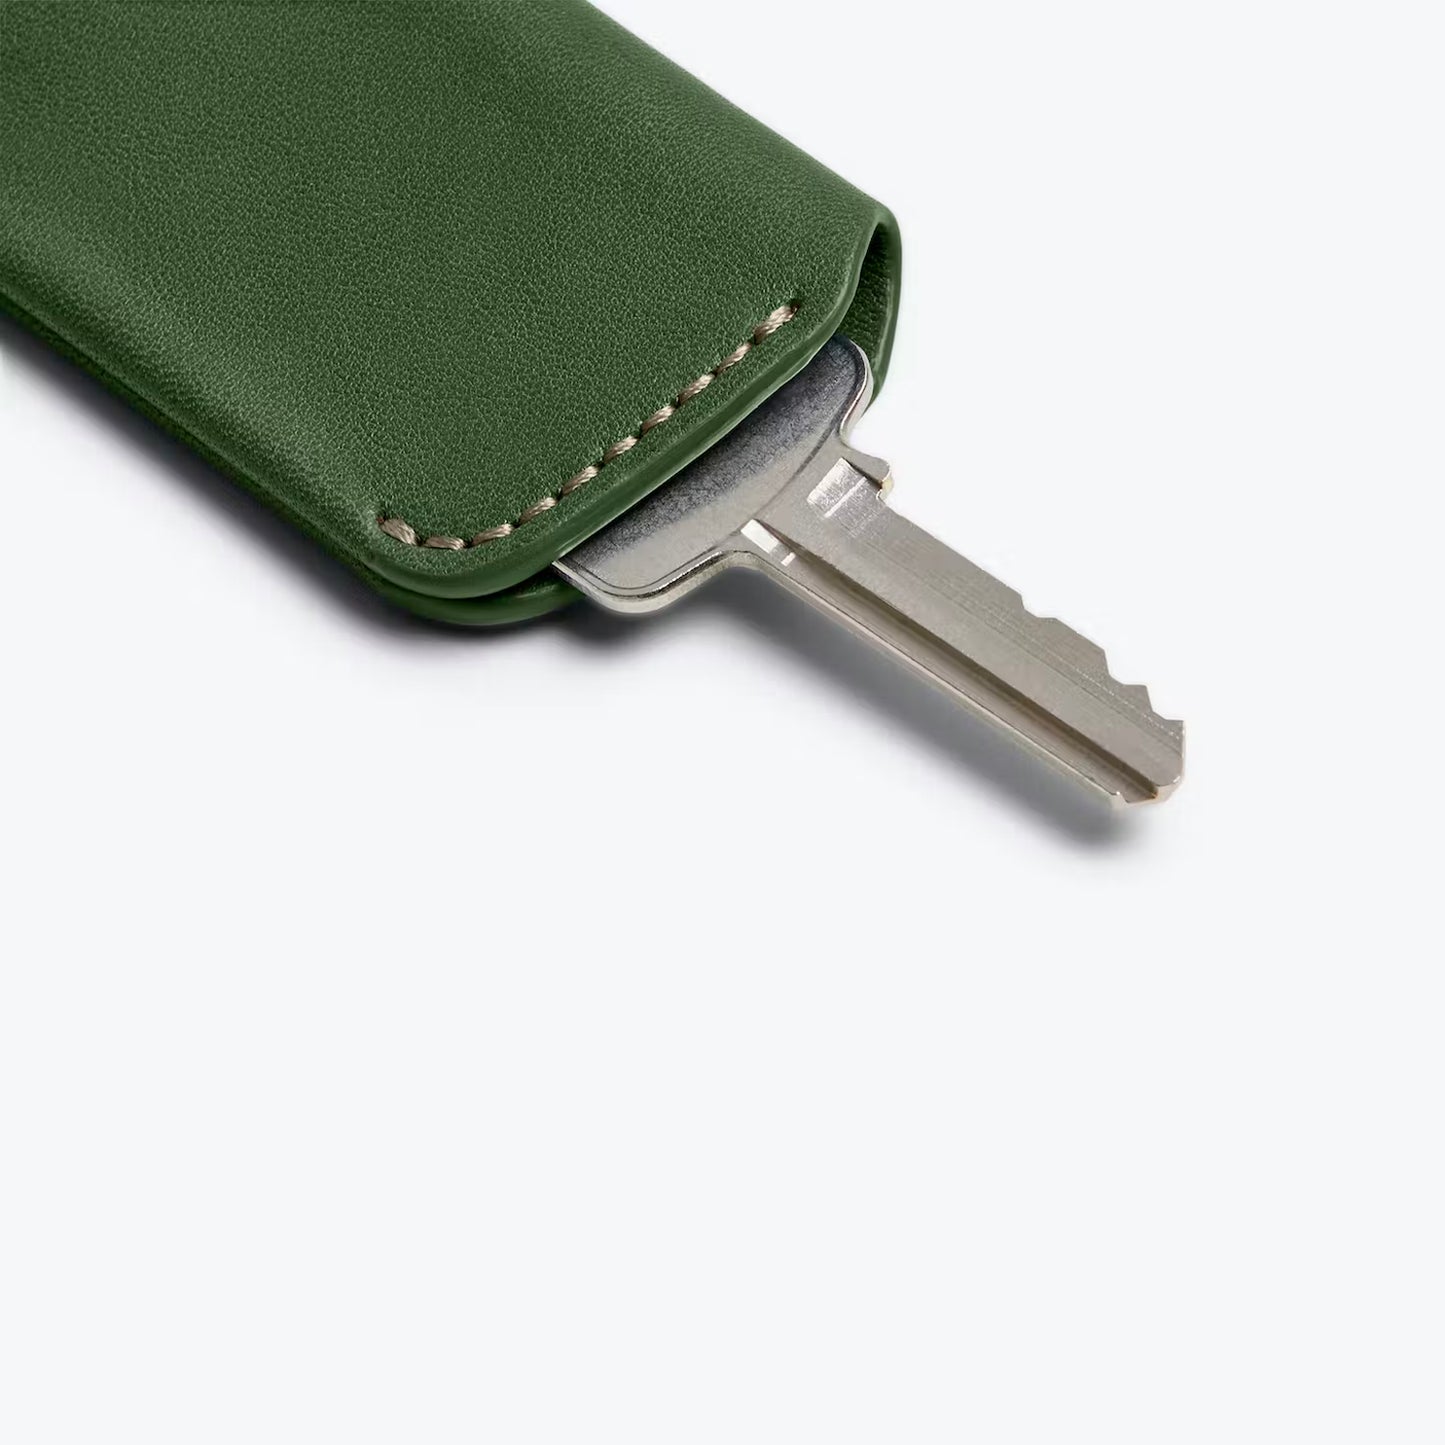 Bellroy - Key Cover Plus (2nd Edition) - Ranger Green